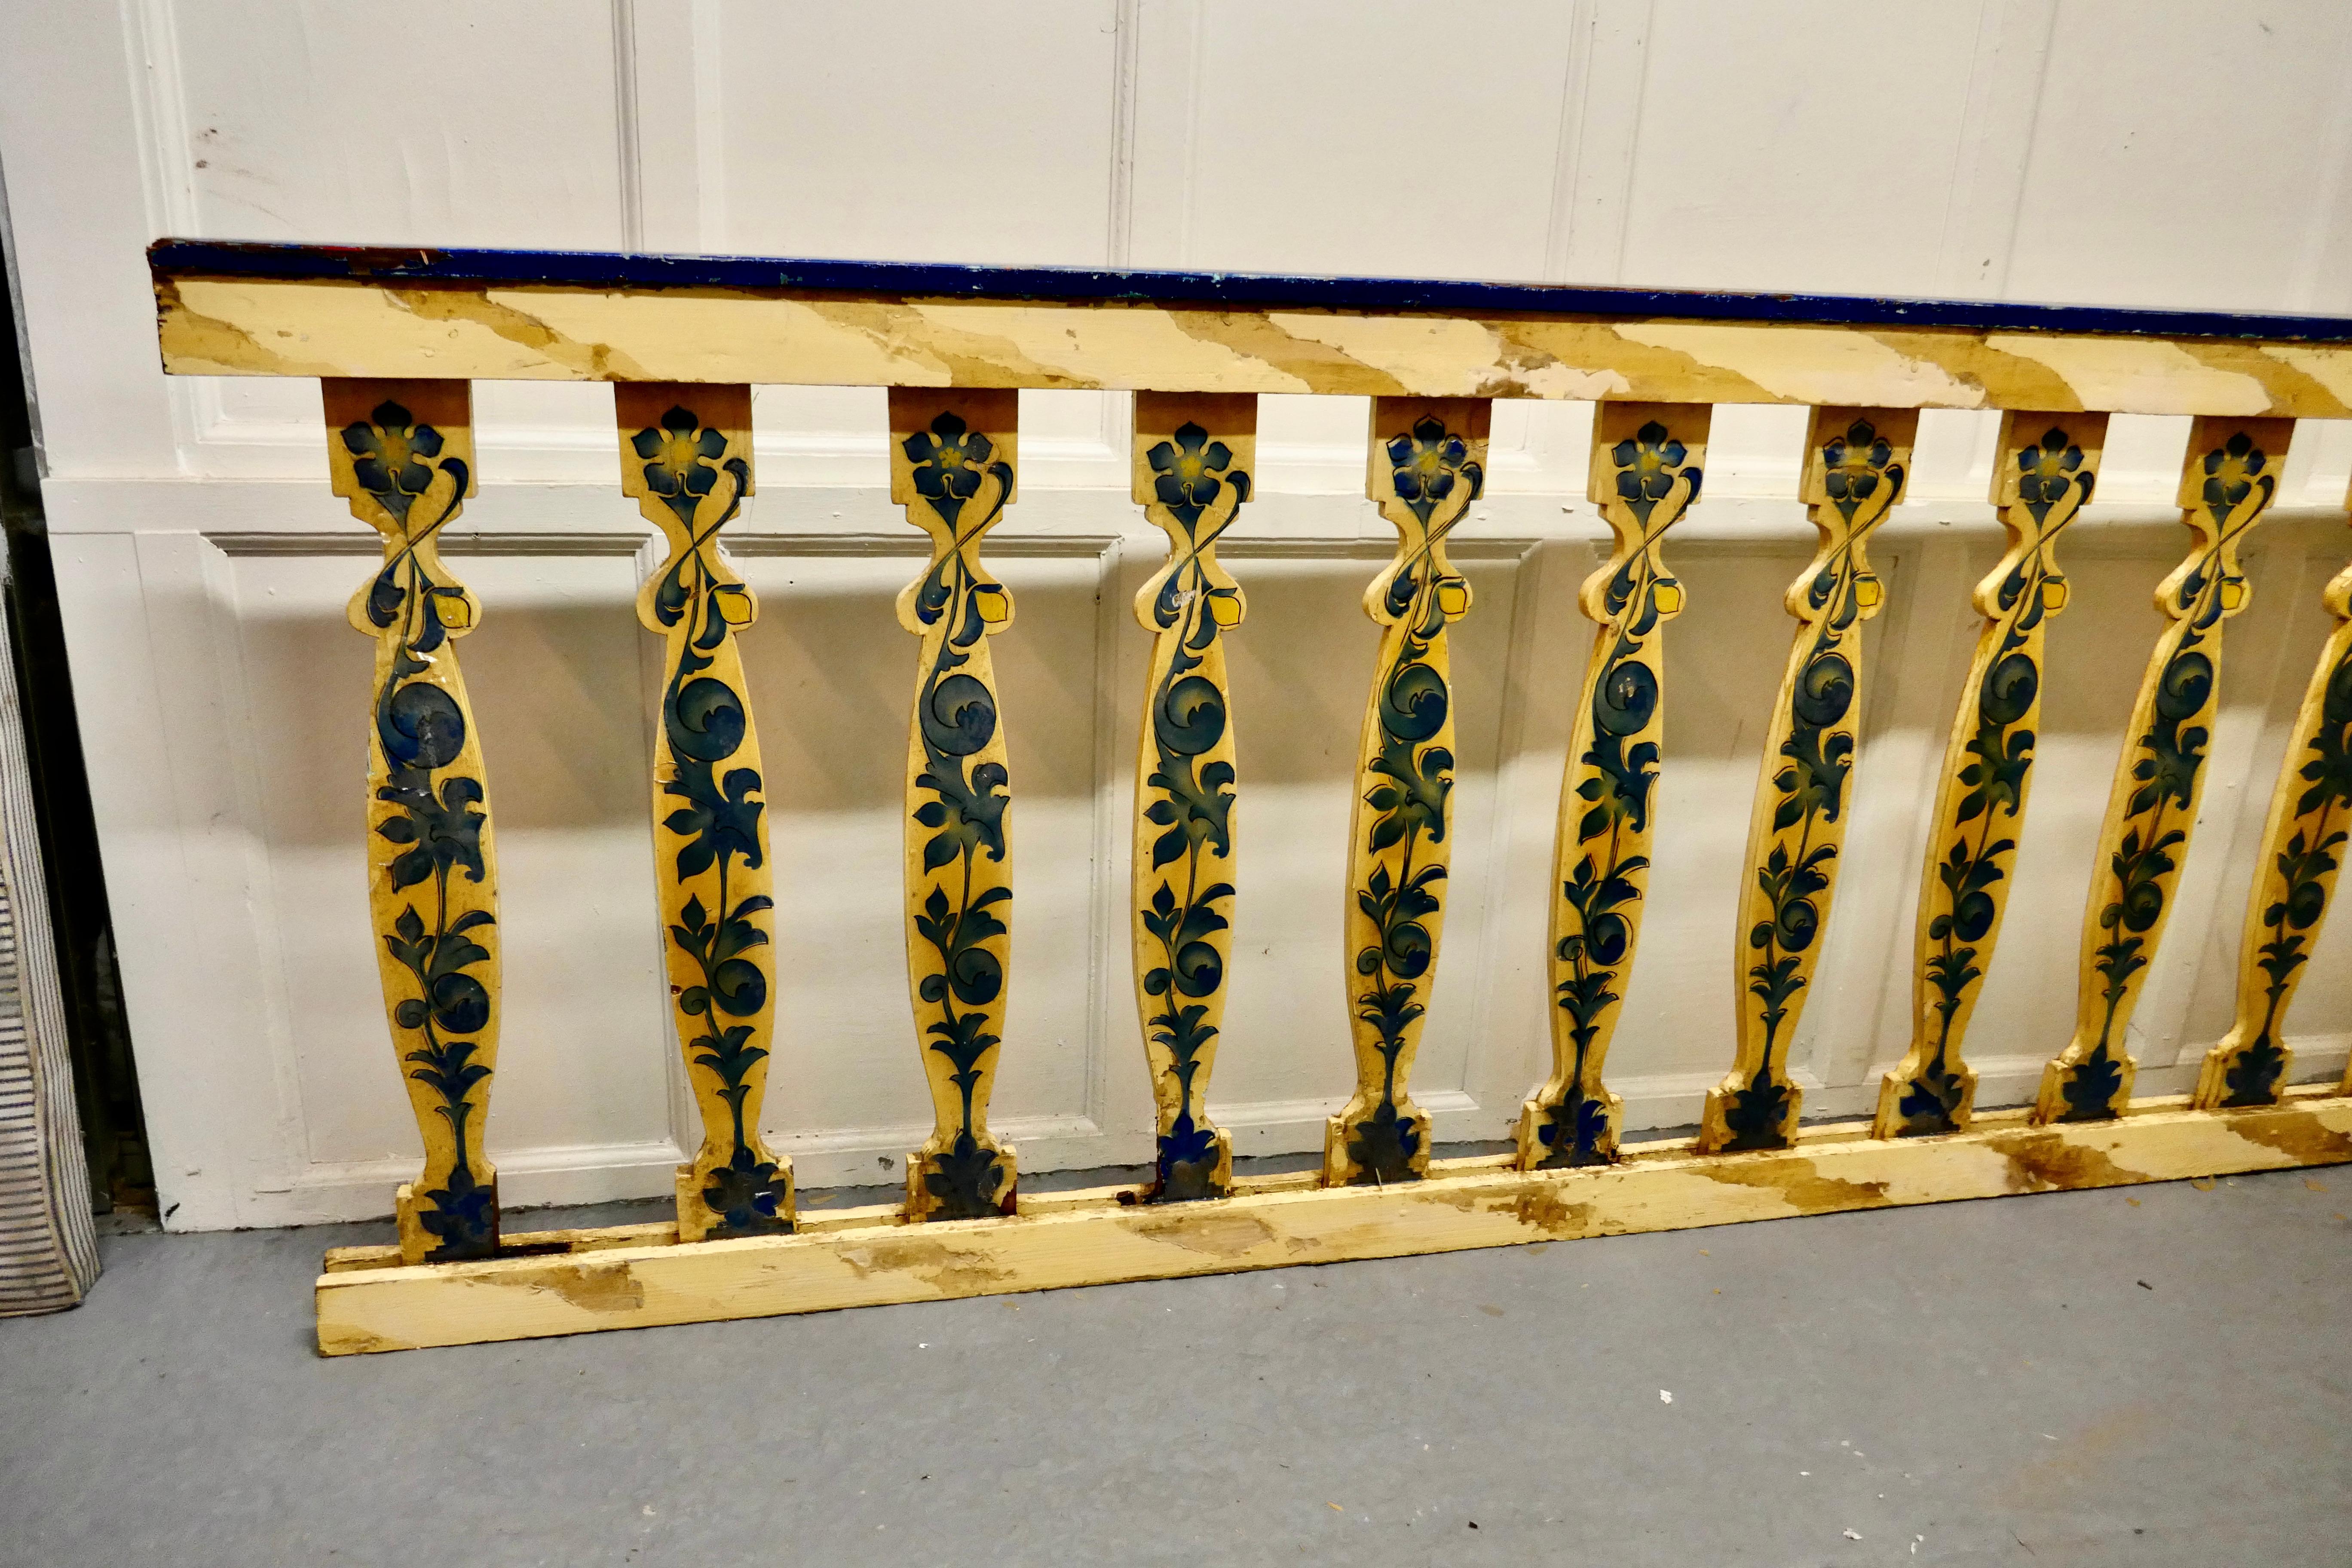 Hand painted wooden railings from a fair ground

Great decorative pieces, there are 2 of these one 5ft long and the other 8ft
Each has a 3.5” wide top rail, the shaped balusters are set in a heavy base 

The decorative paint is in good